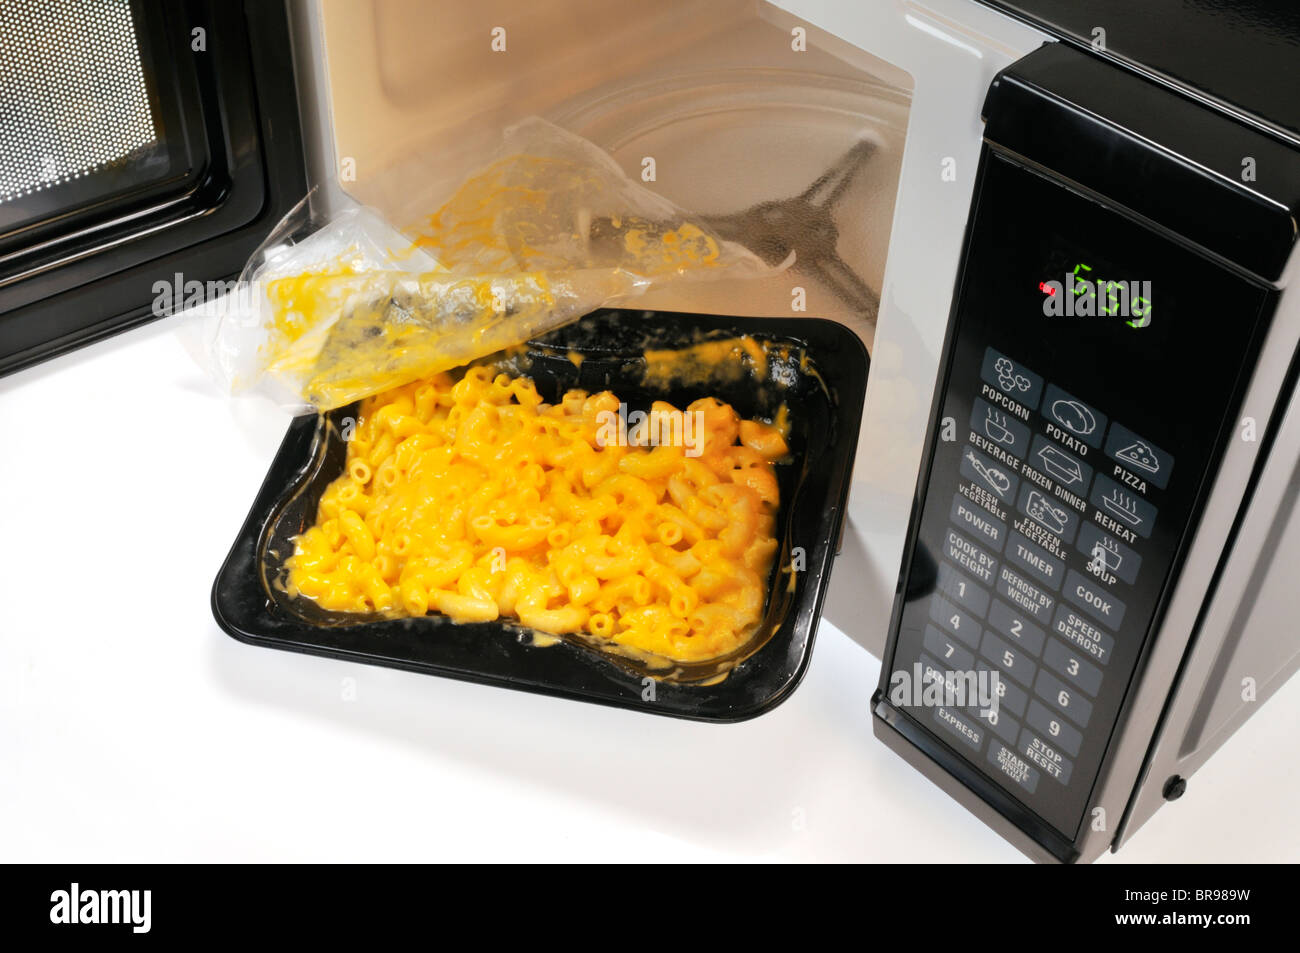 https://c8.alamy.com/comp/BR989W/tray-of-just-microwaved-frozen-macaroni-and-cheese-with-plastic-cover-BR989W.jpg